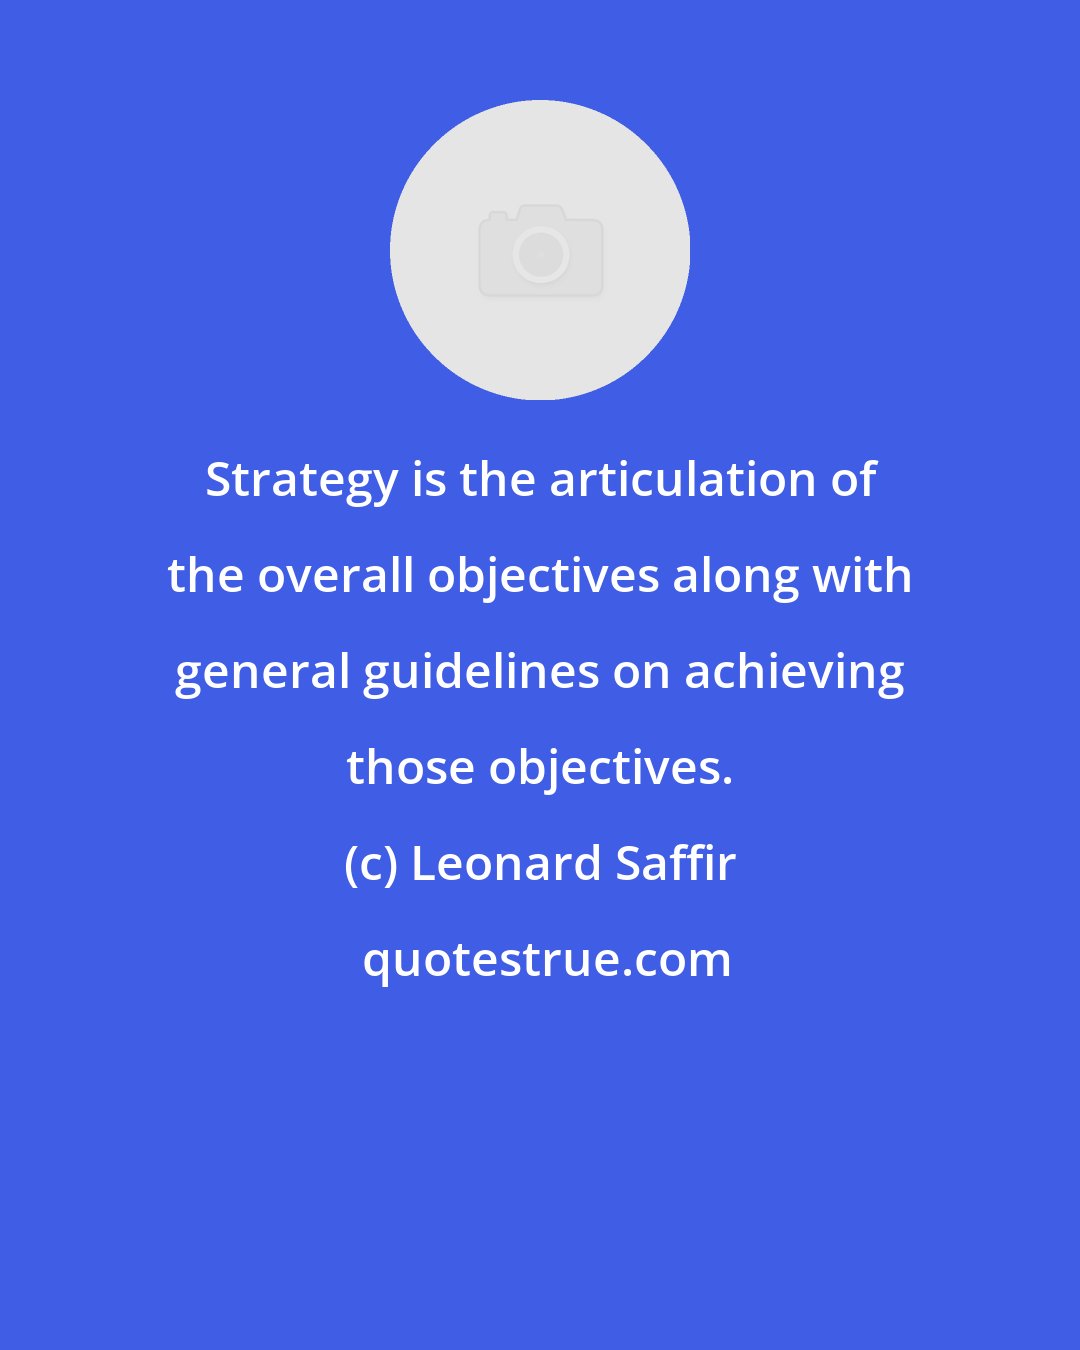 Leonard Saffir: Strategy is the articulation of the overall objectives along with general guidelines on achieving those objectives.